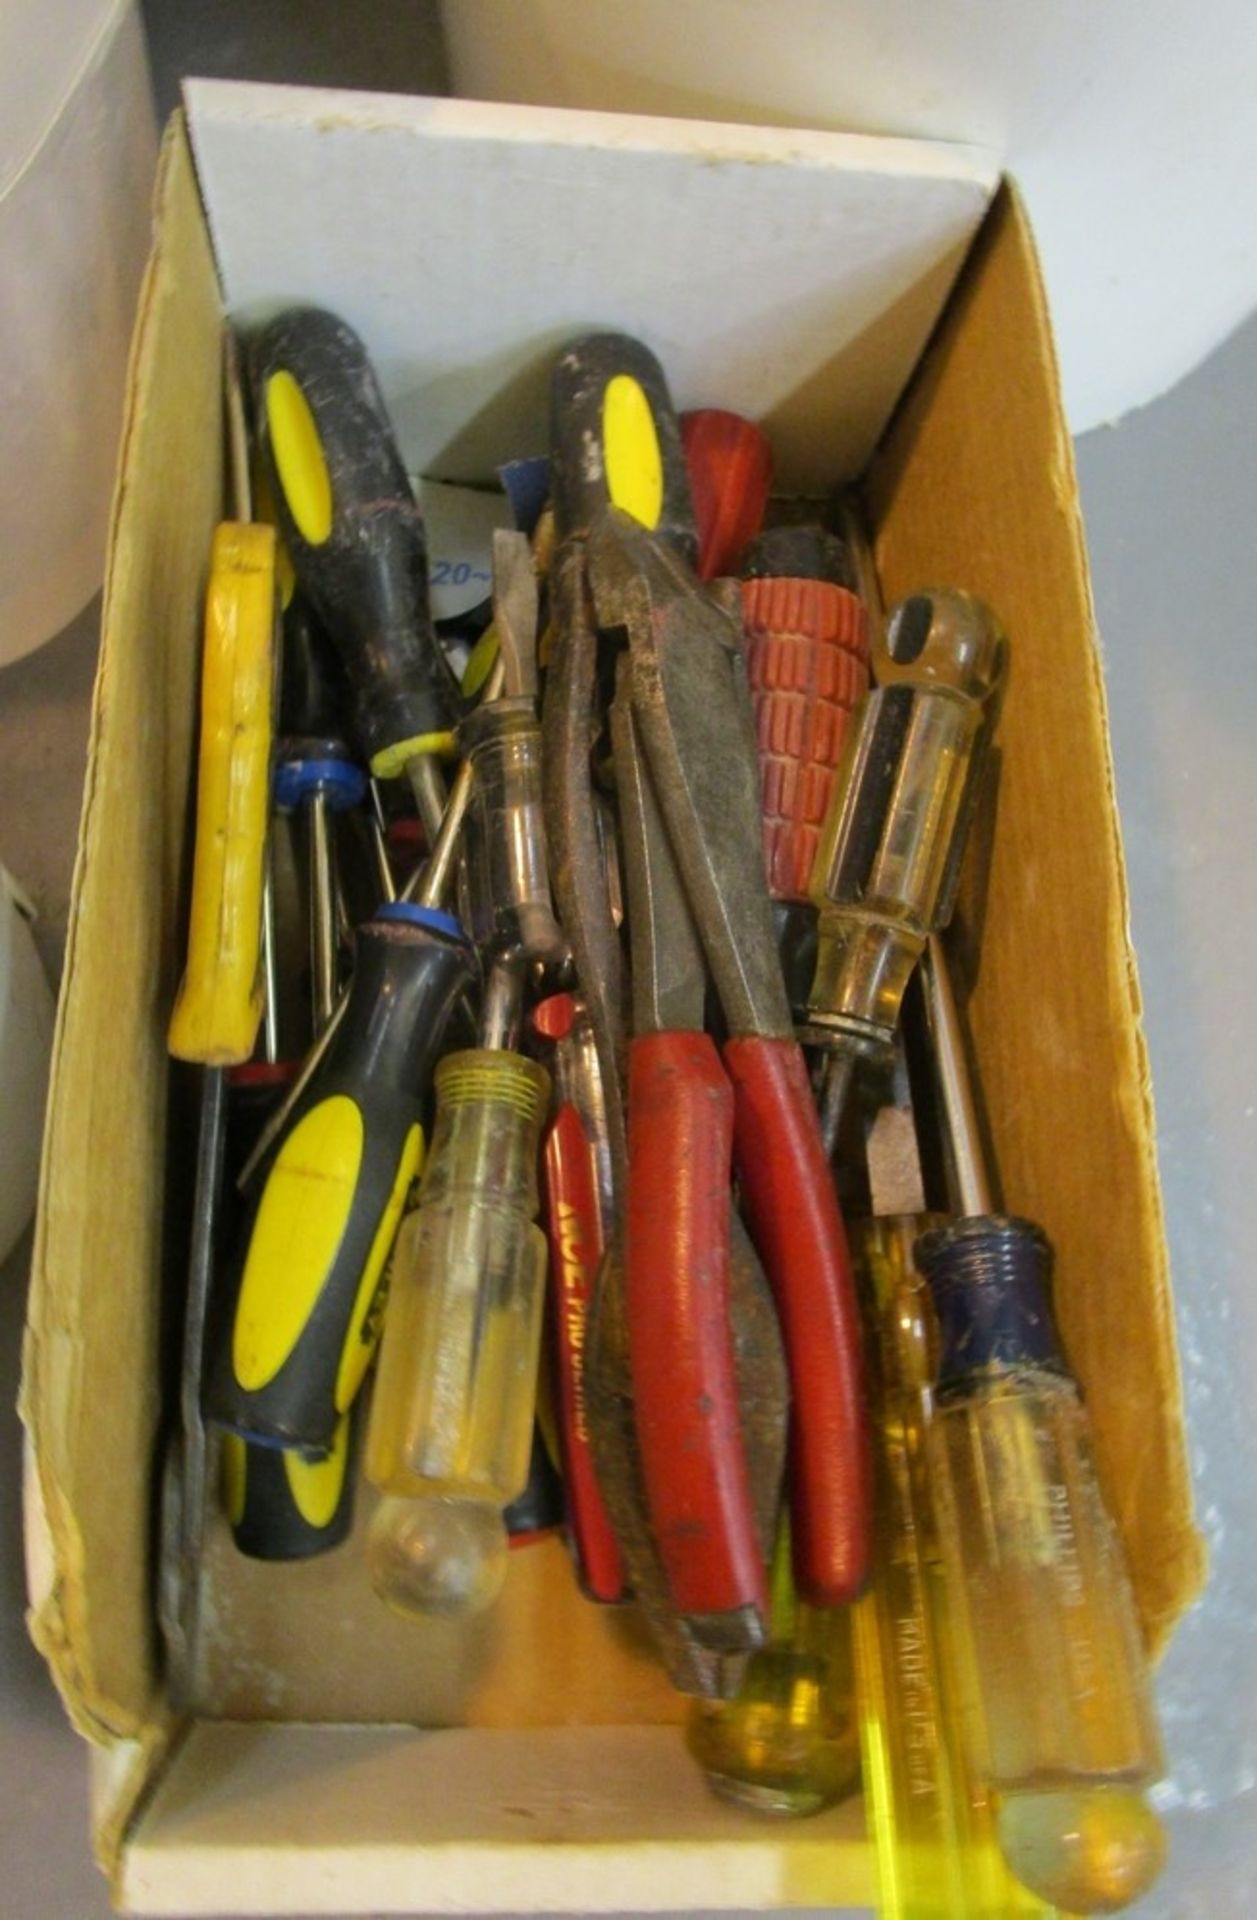 Assorted Shop Tools Including Files, Wrenches, Screwdrivers, Rivet Gun - Image 8 of 12